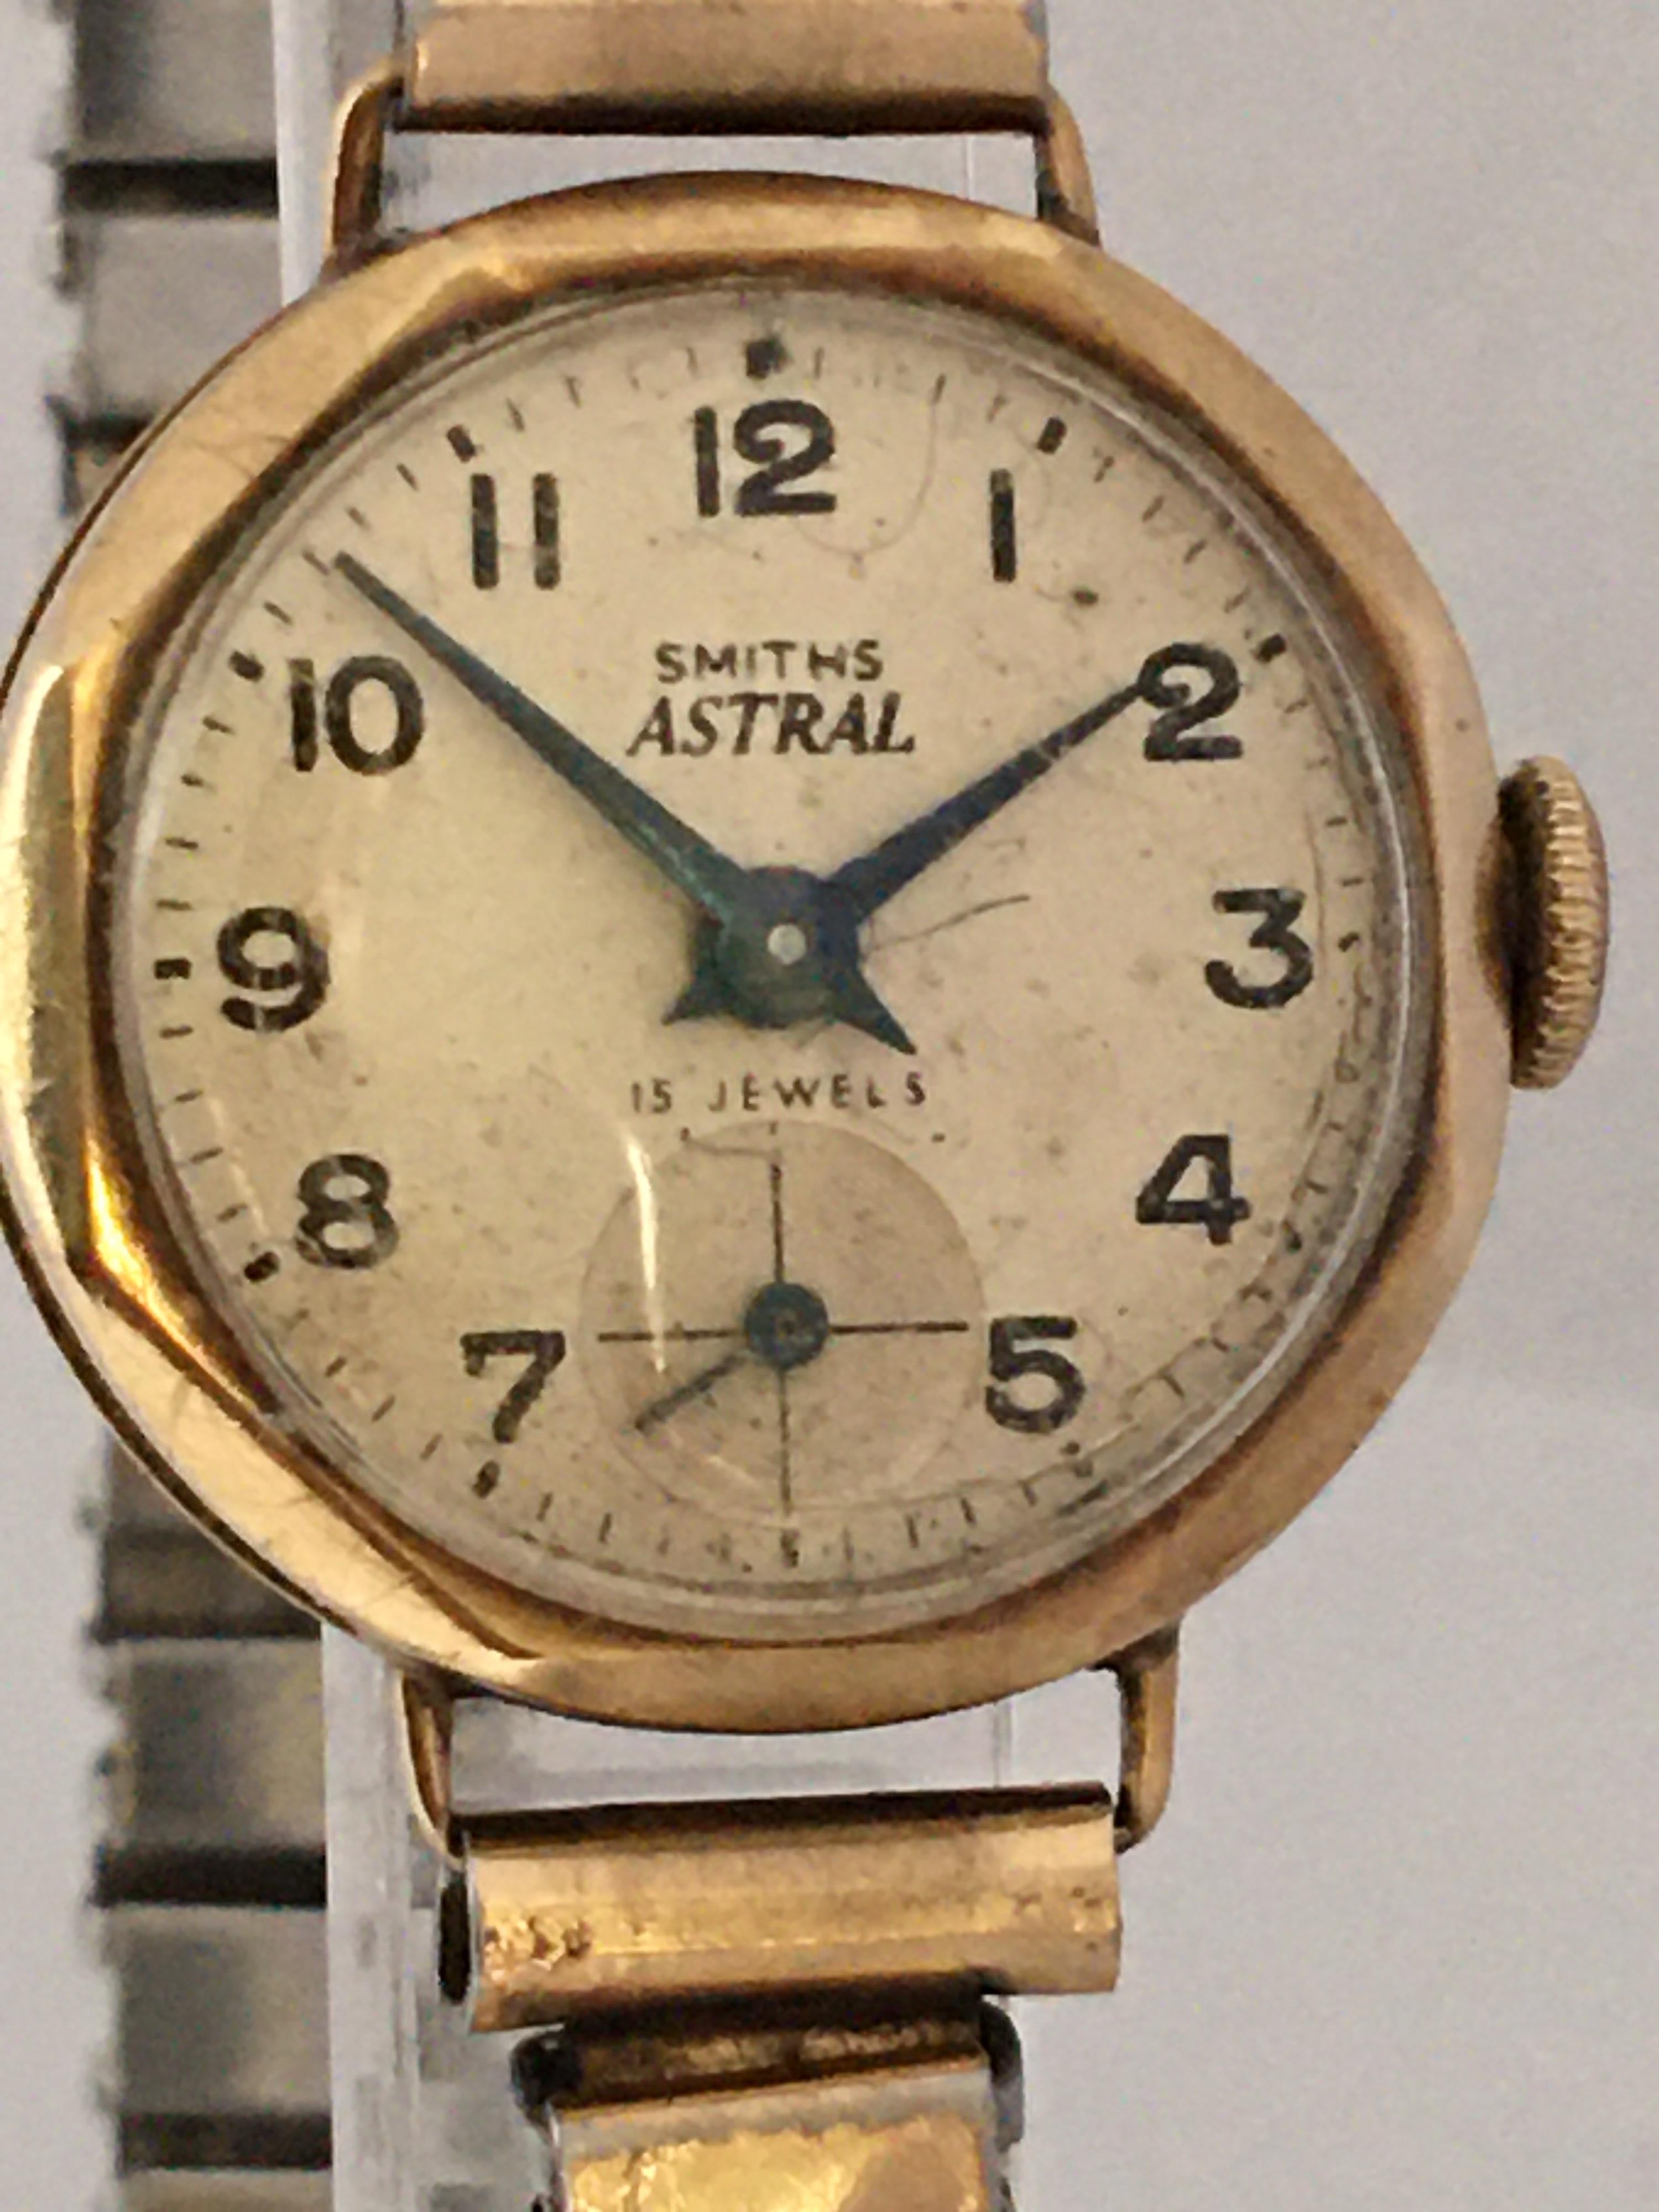 This beautiful pre-owned hand winding gold watch is working and it is ticking well.
Visible signs of ageing and wear with some scratches on the glass and the gold watch case. Tiny dents on the back cover case. There is a tiny crack on the glass